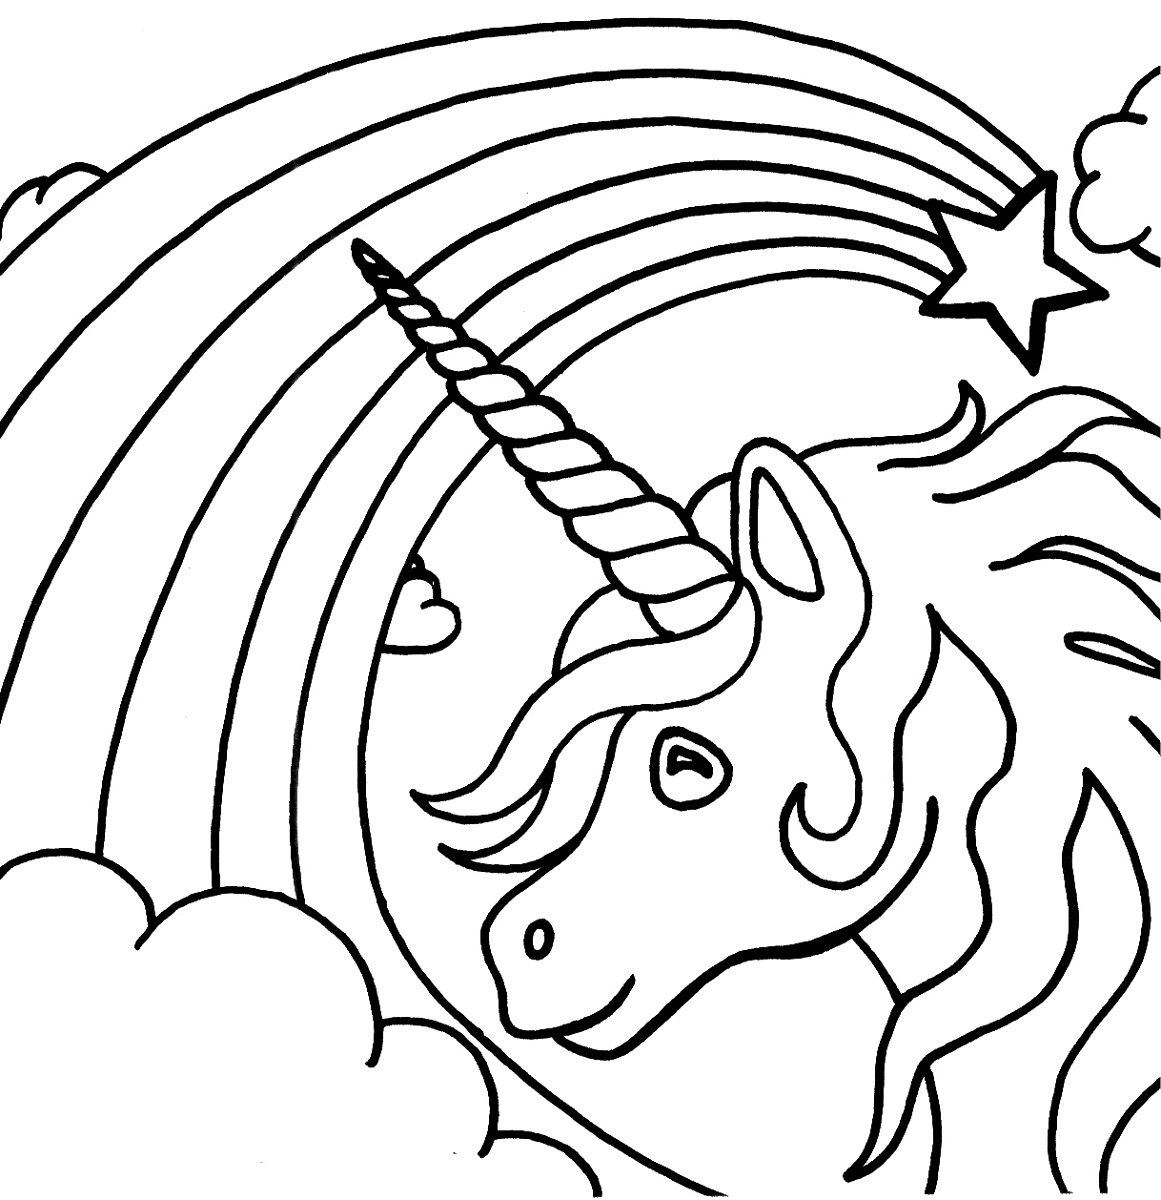 cool-unicorn-coloring-pages-at-getcolorings-free-printable-colorings-pages-to-print-and-color